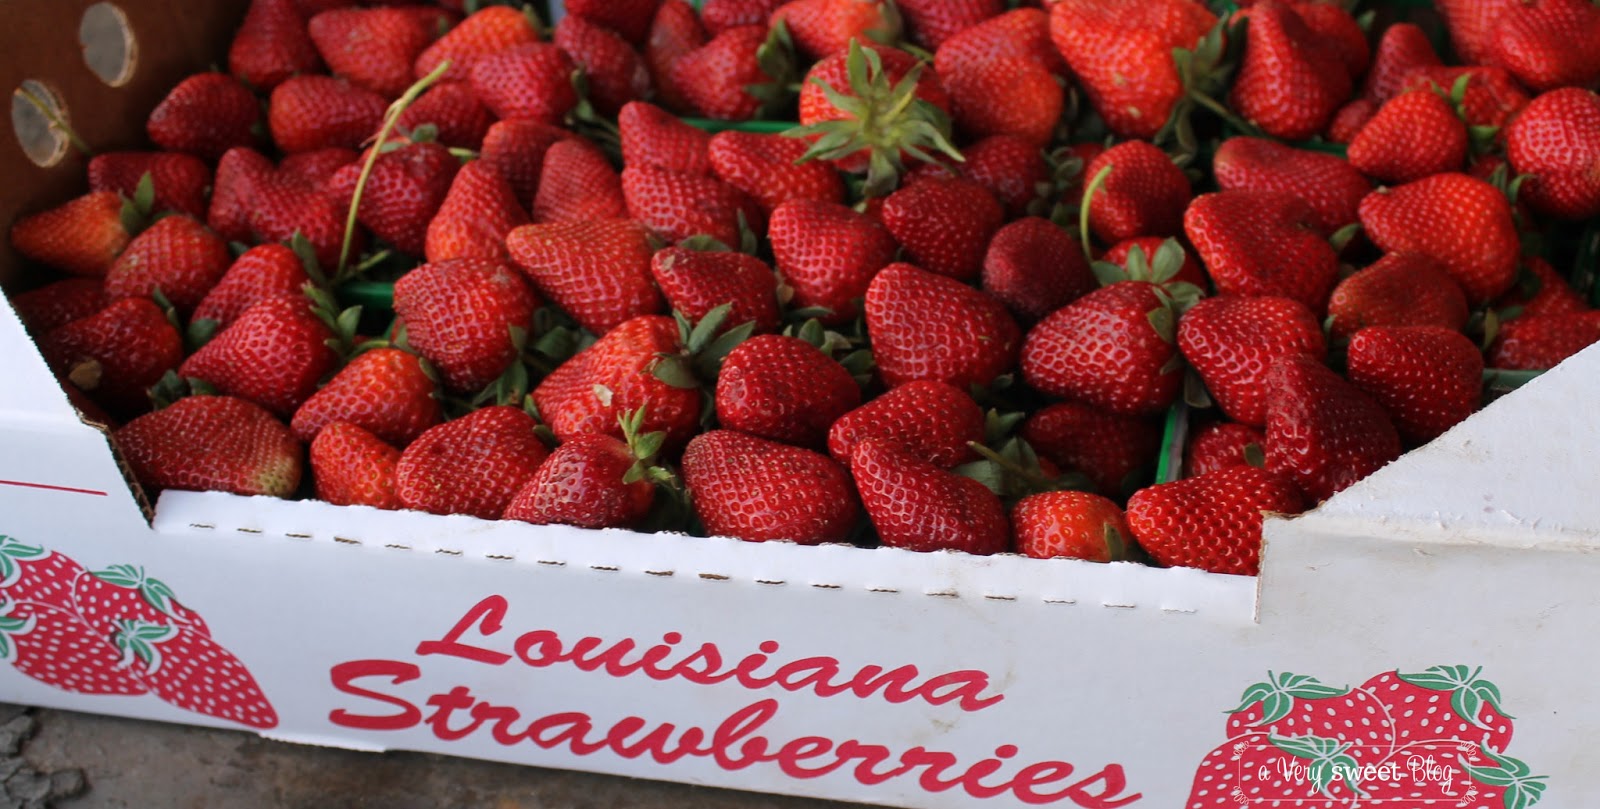 Ponchatoula Strawberry Festival A Berry Good Time! A Very Sweet Blog